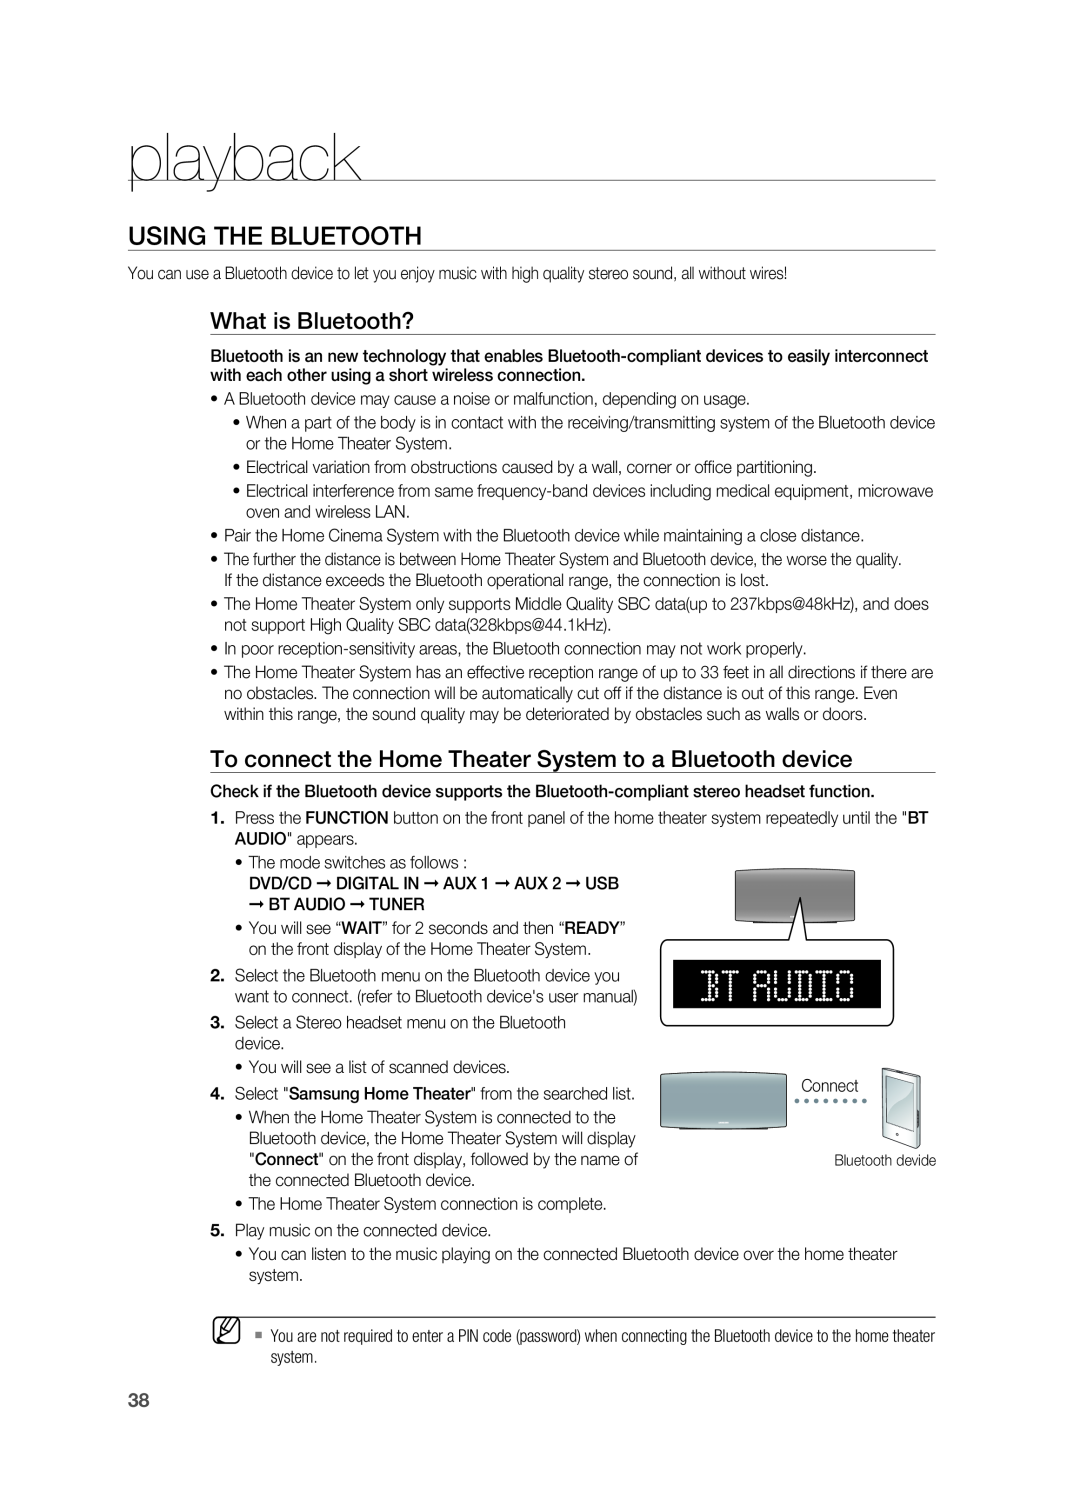 Samsung HT-A100 user manual USING the BLUETOOTH, What is Bluetooth?, playback 